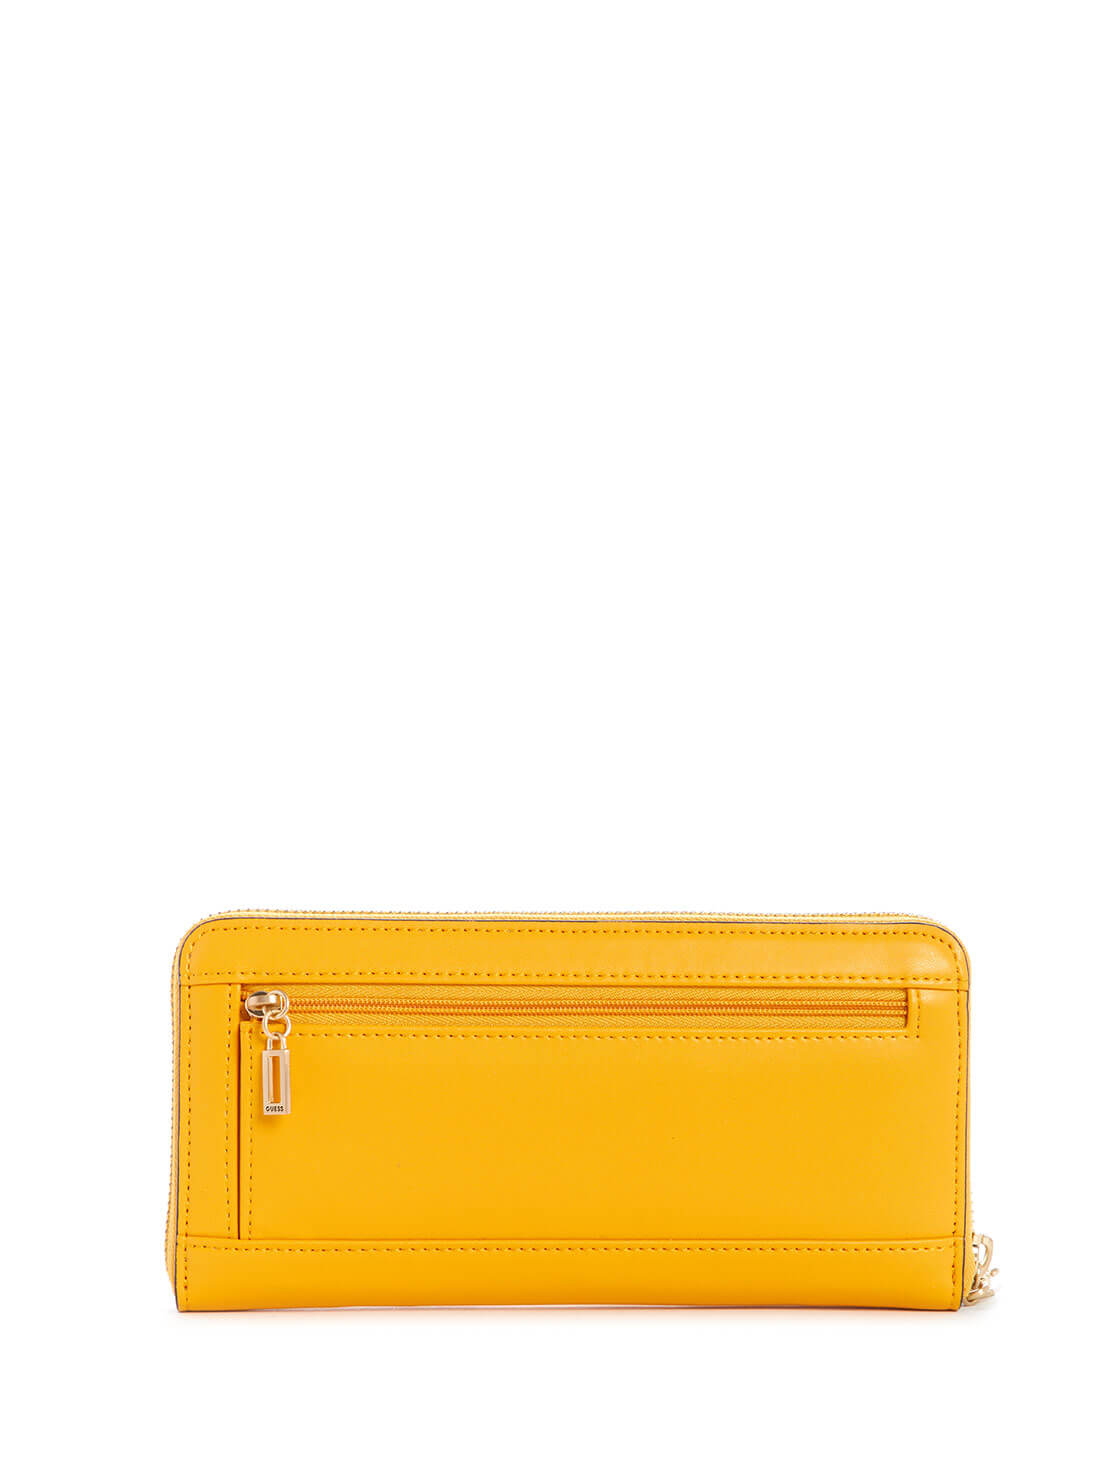 GUESS Womens Yellow Hensely Large Wallet VS811346 Back View